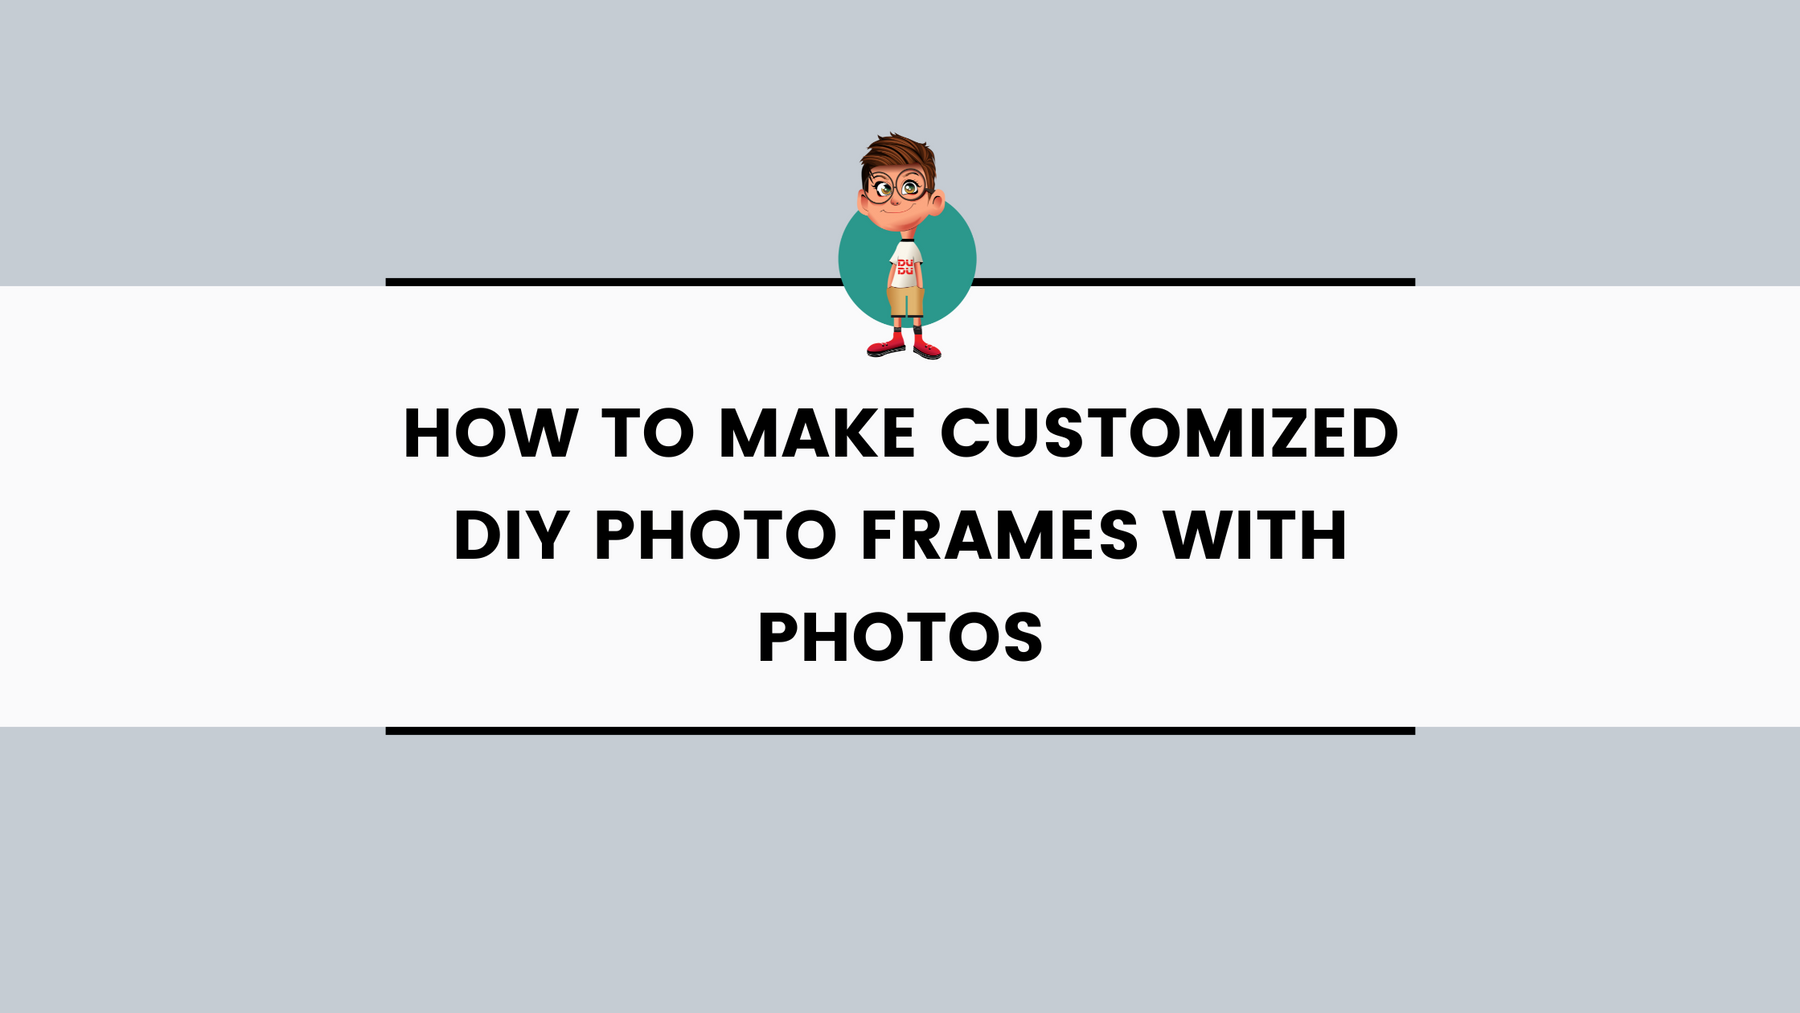 How to Make Customized DIY Photo Frames With Photos